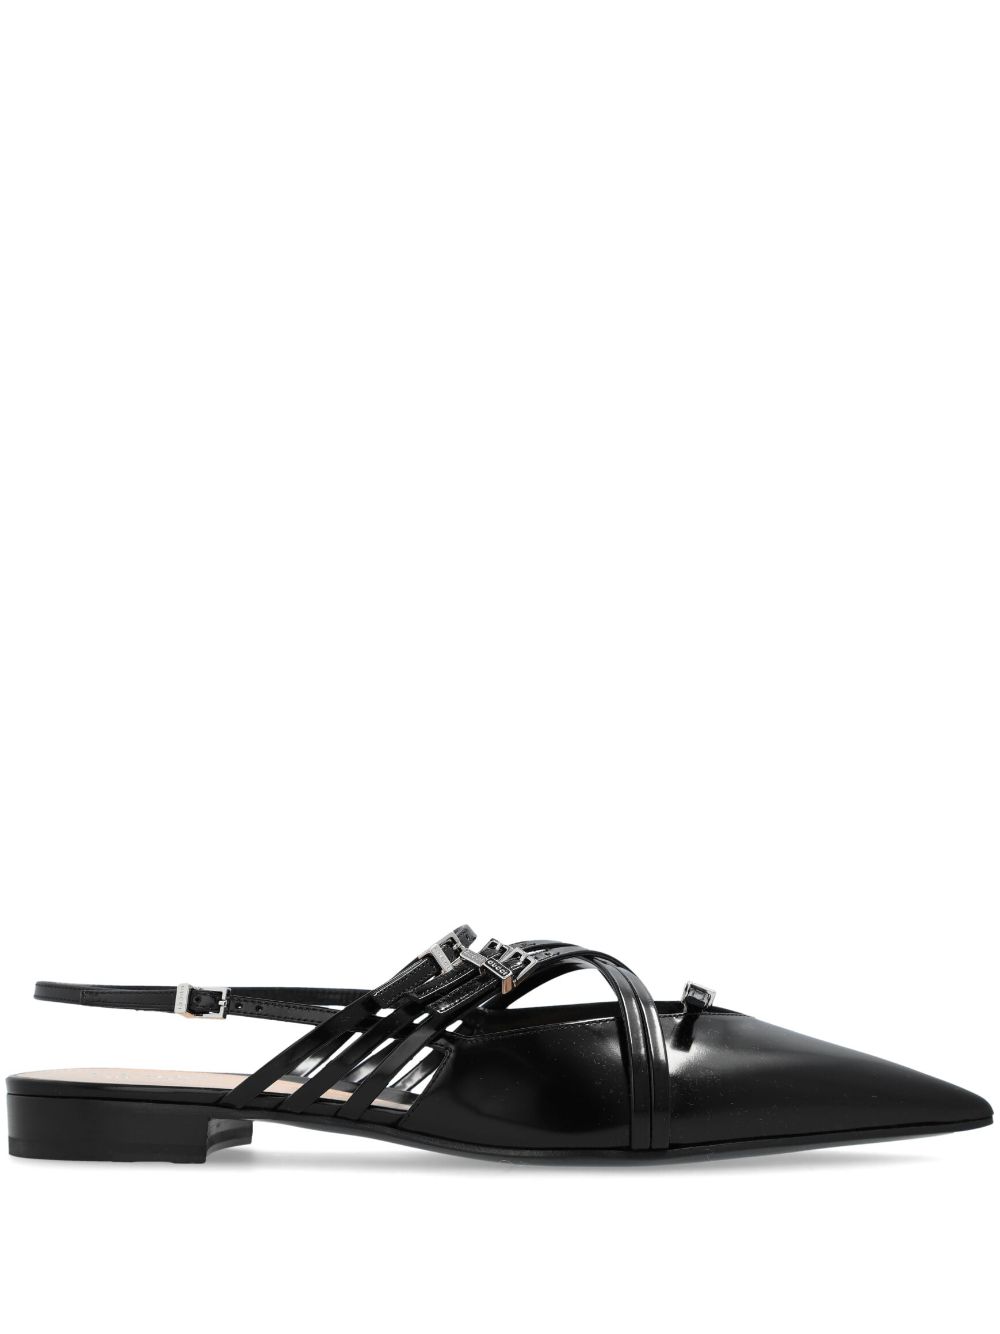 Gucci leather strappy ballerina shoes Black